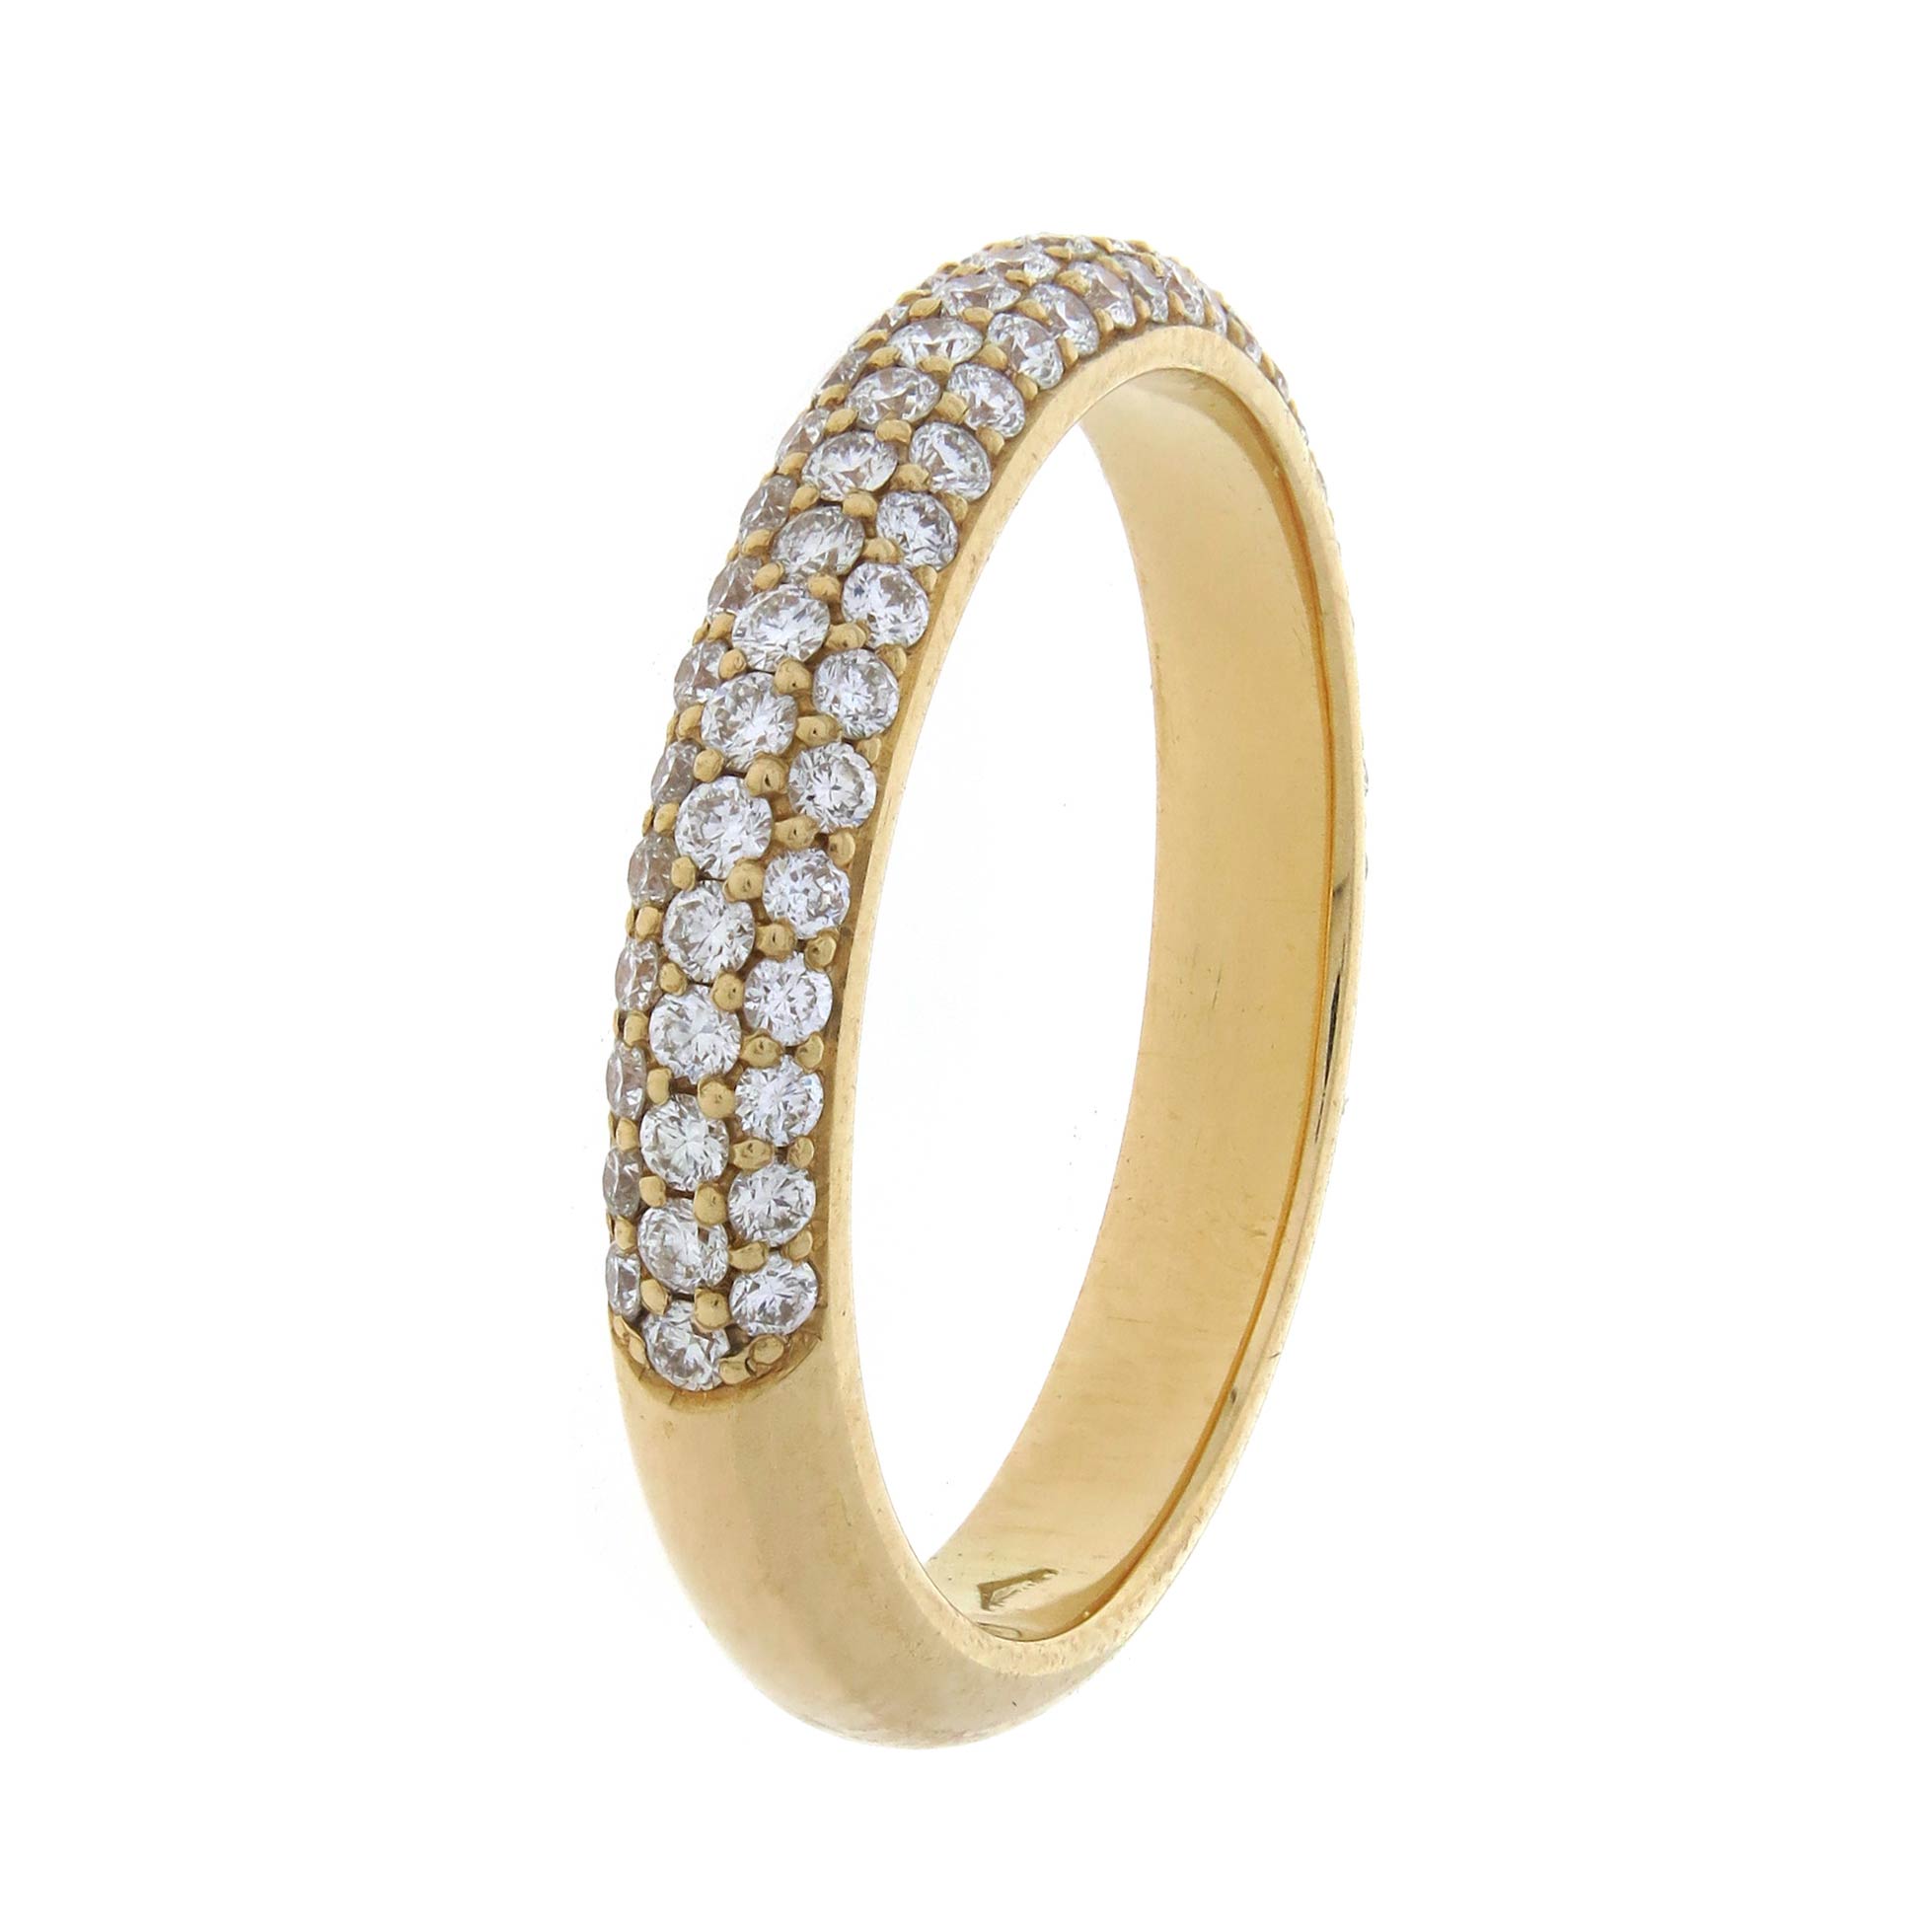 Eternity ring with three rows of diamond pave in yellow gold 18k